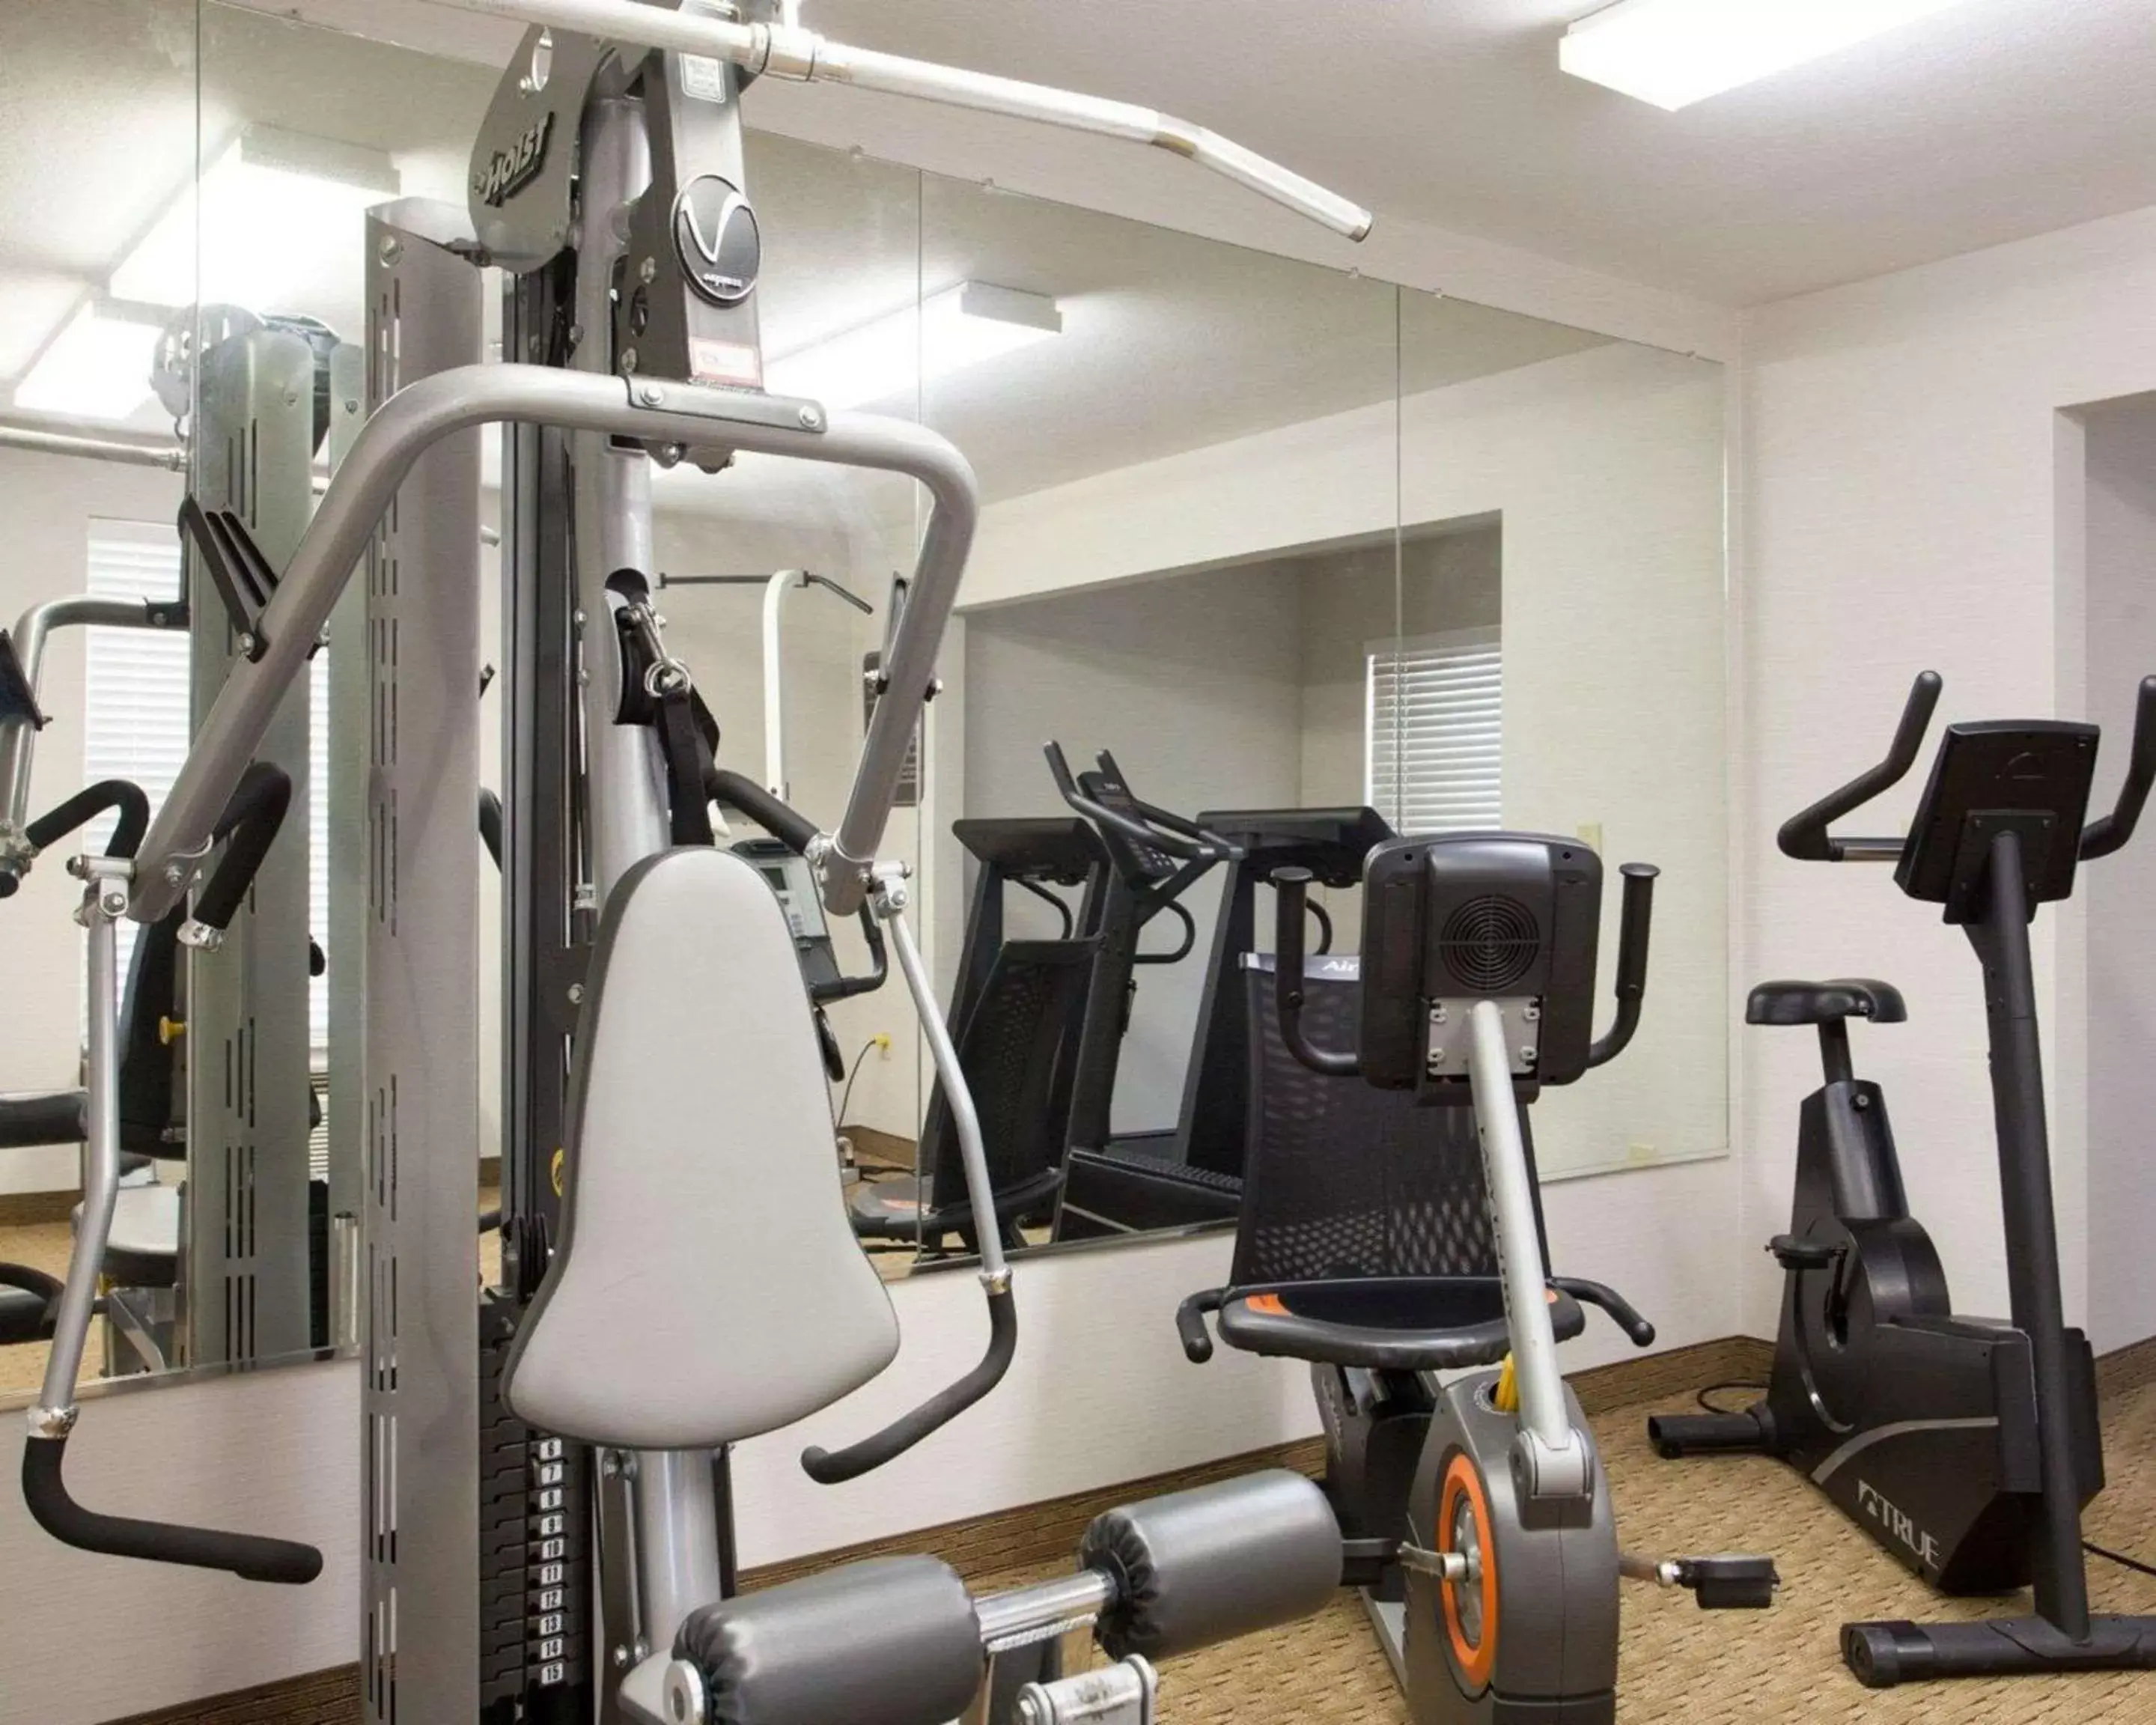 Fitness centre/facilities, Fitness Center/Facilities in Quality Inn & Suites I-40 East